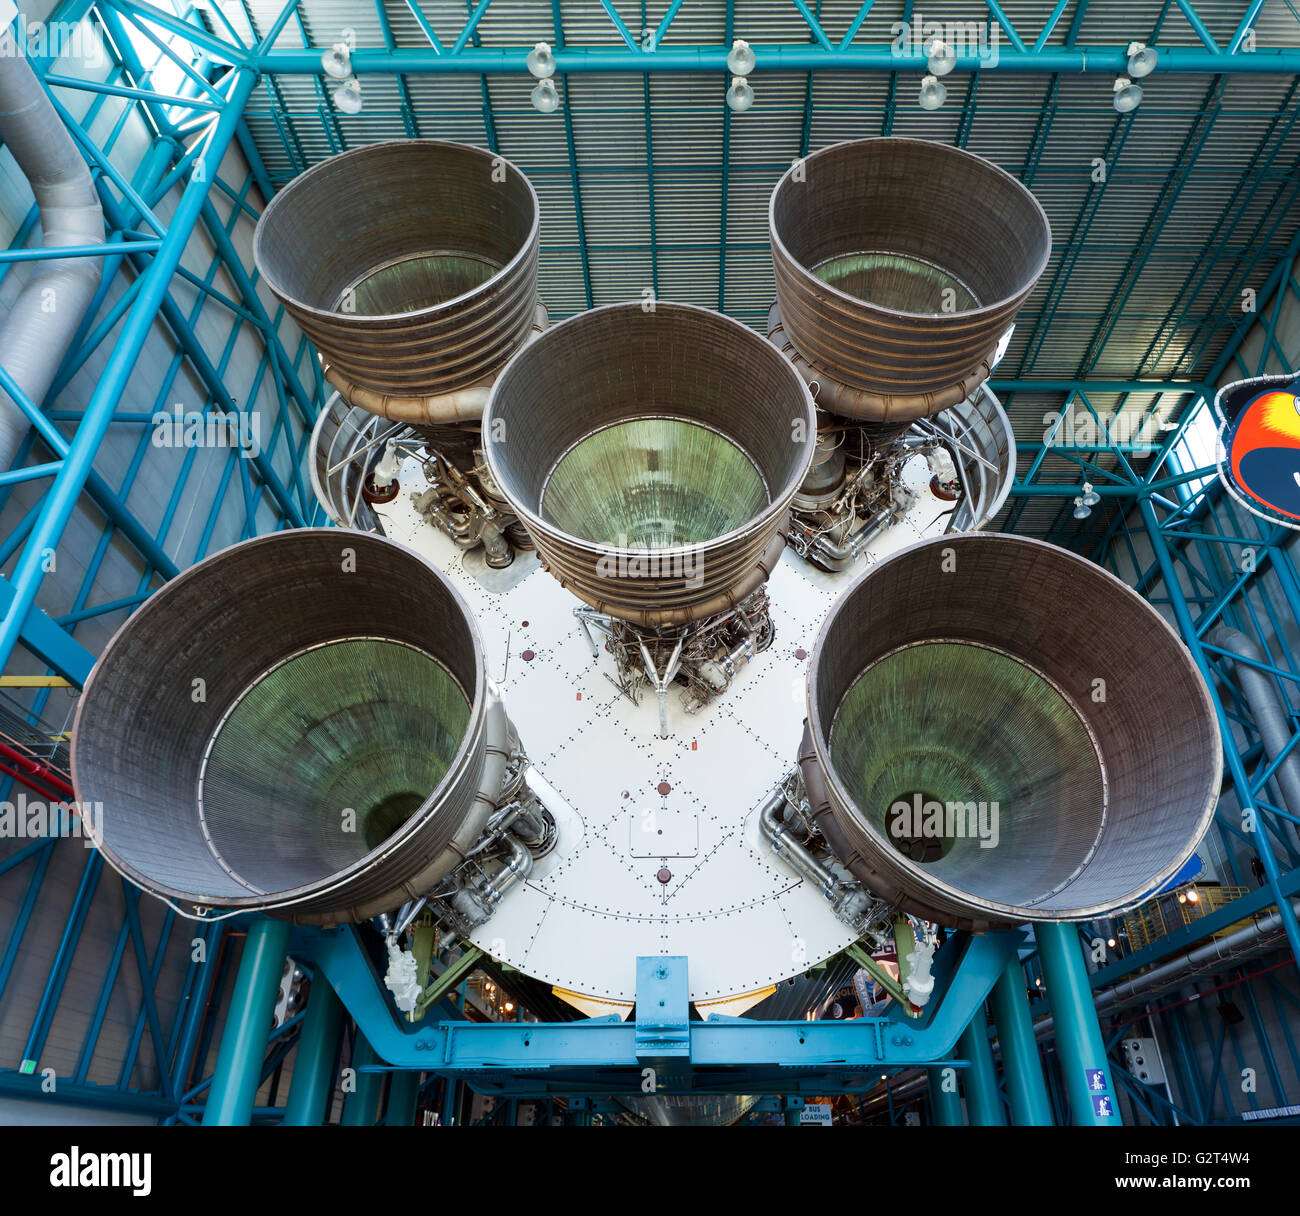 Giant Rocket Motors on the First Stage of NASA's Saturn V Rocket, which was used in the Apollo program to take men to the moon. Stock Photo